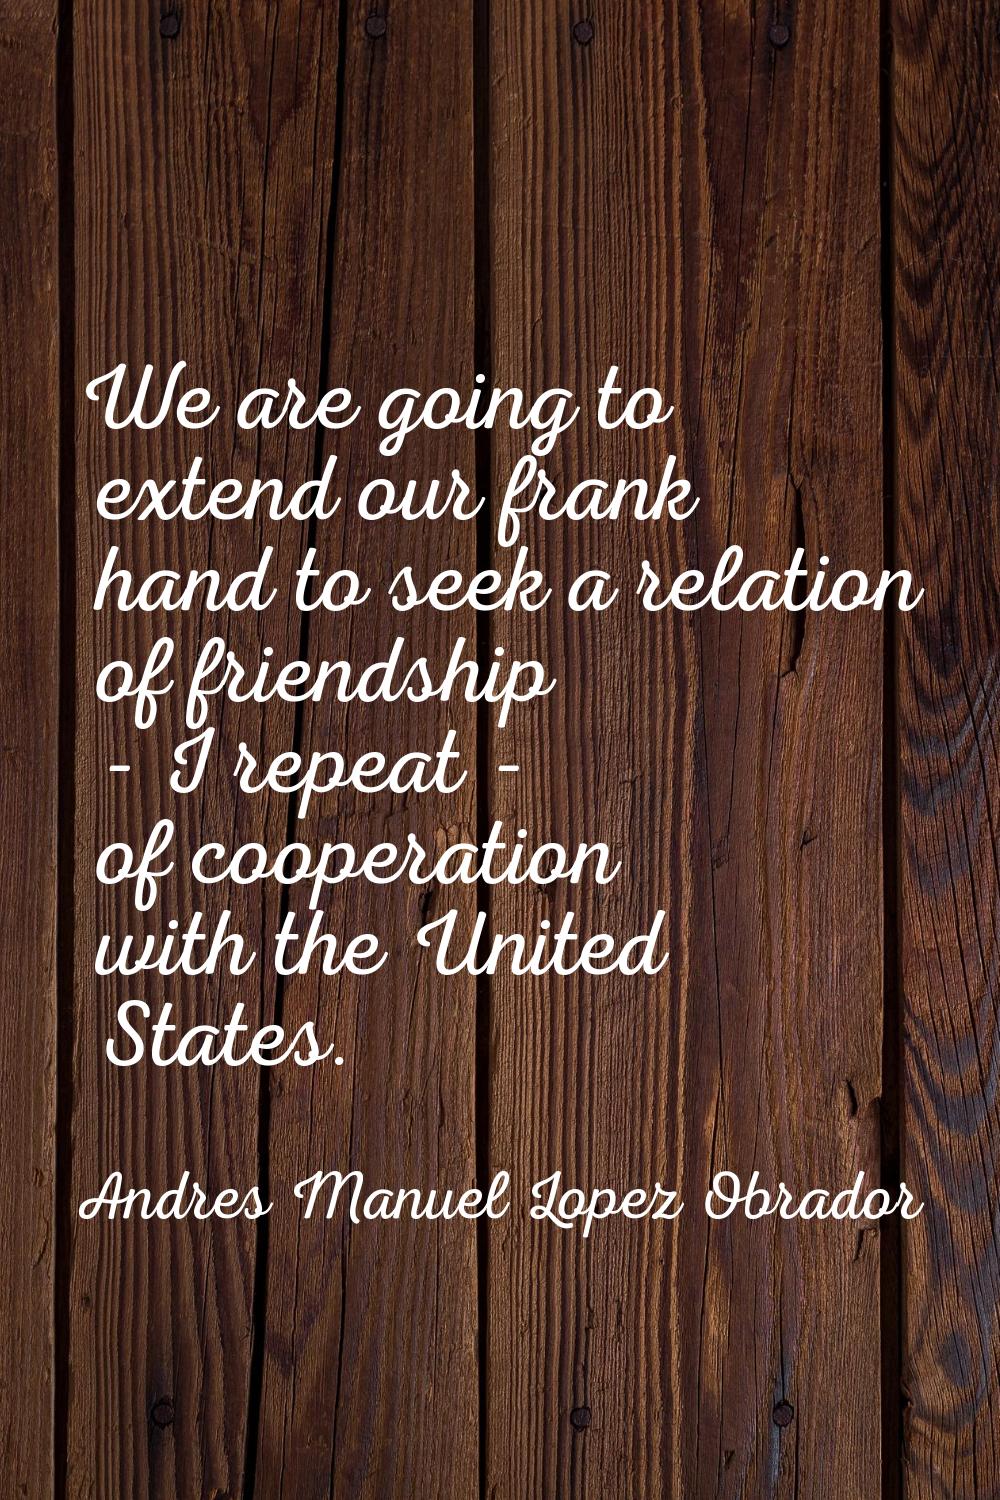 We are going to extend our frank hand to seek a relation of friendship - I repeat - of cooperation 